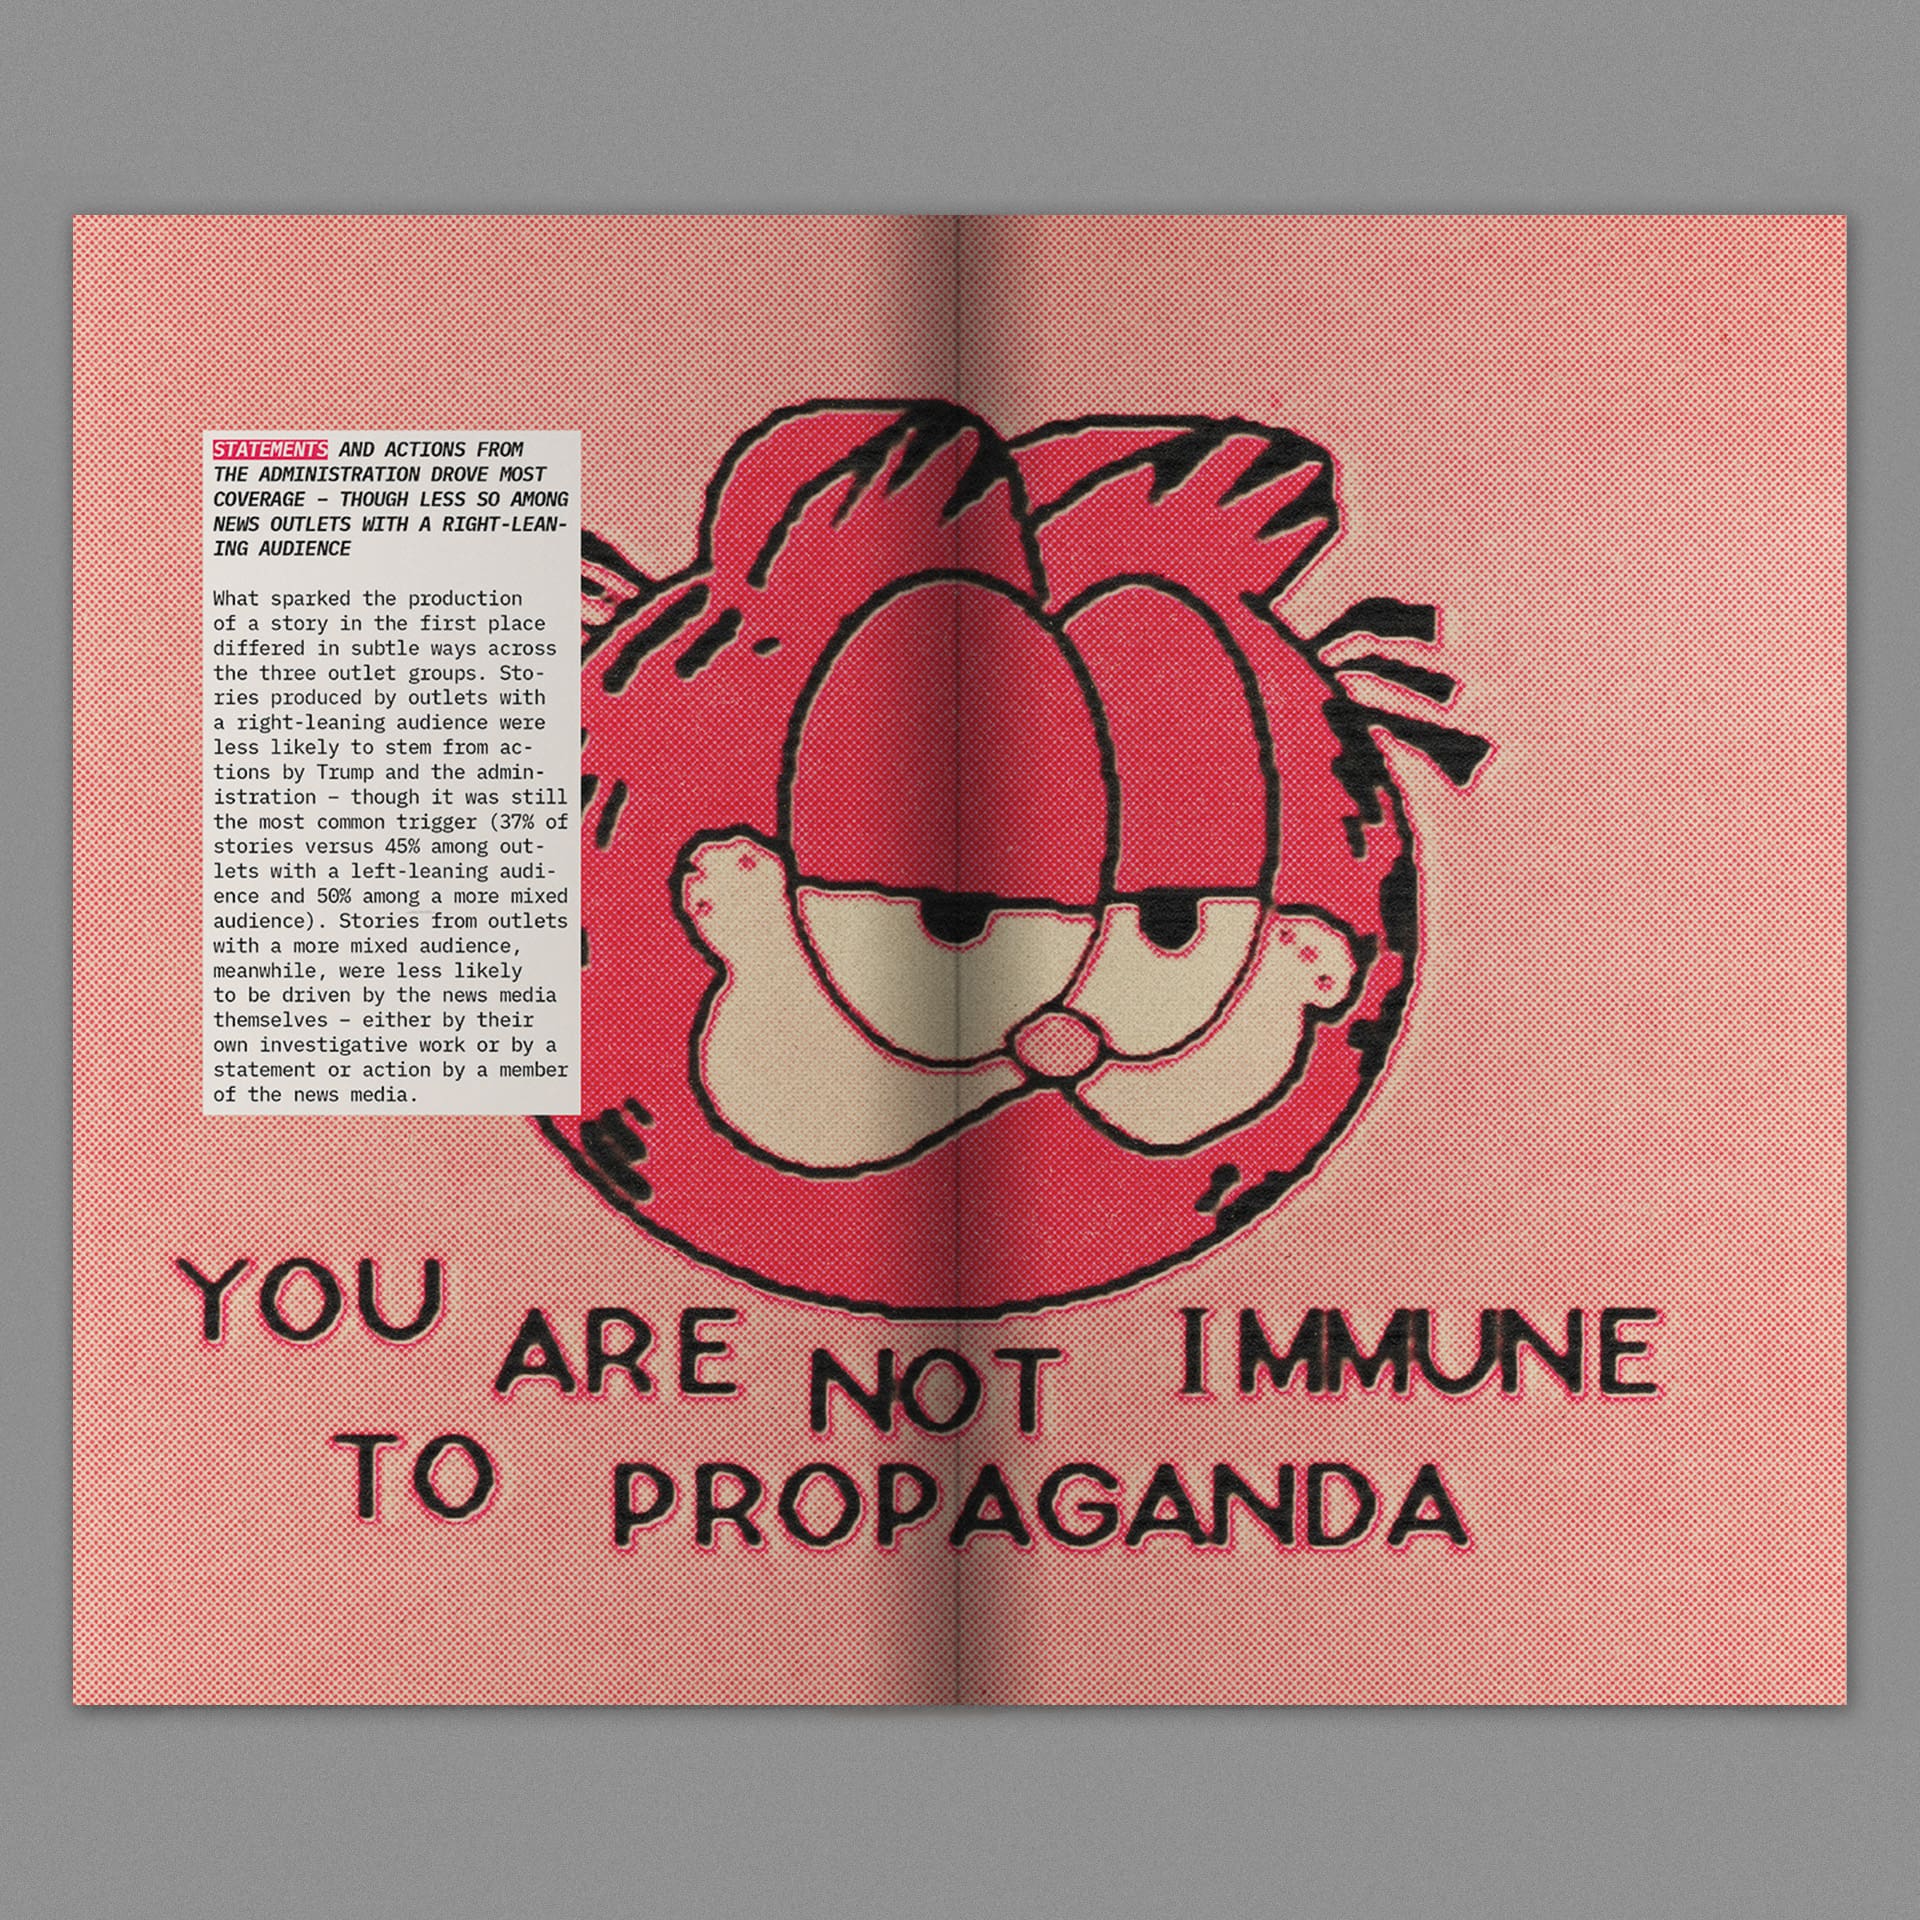 Pink two page spread from a publication about the corporate influence on US media sources. Depicts an image of Garfield the cat's head above large text that says "You are not immune to propaganda". To the left is a white textbox with small black text.